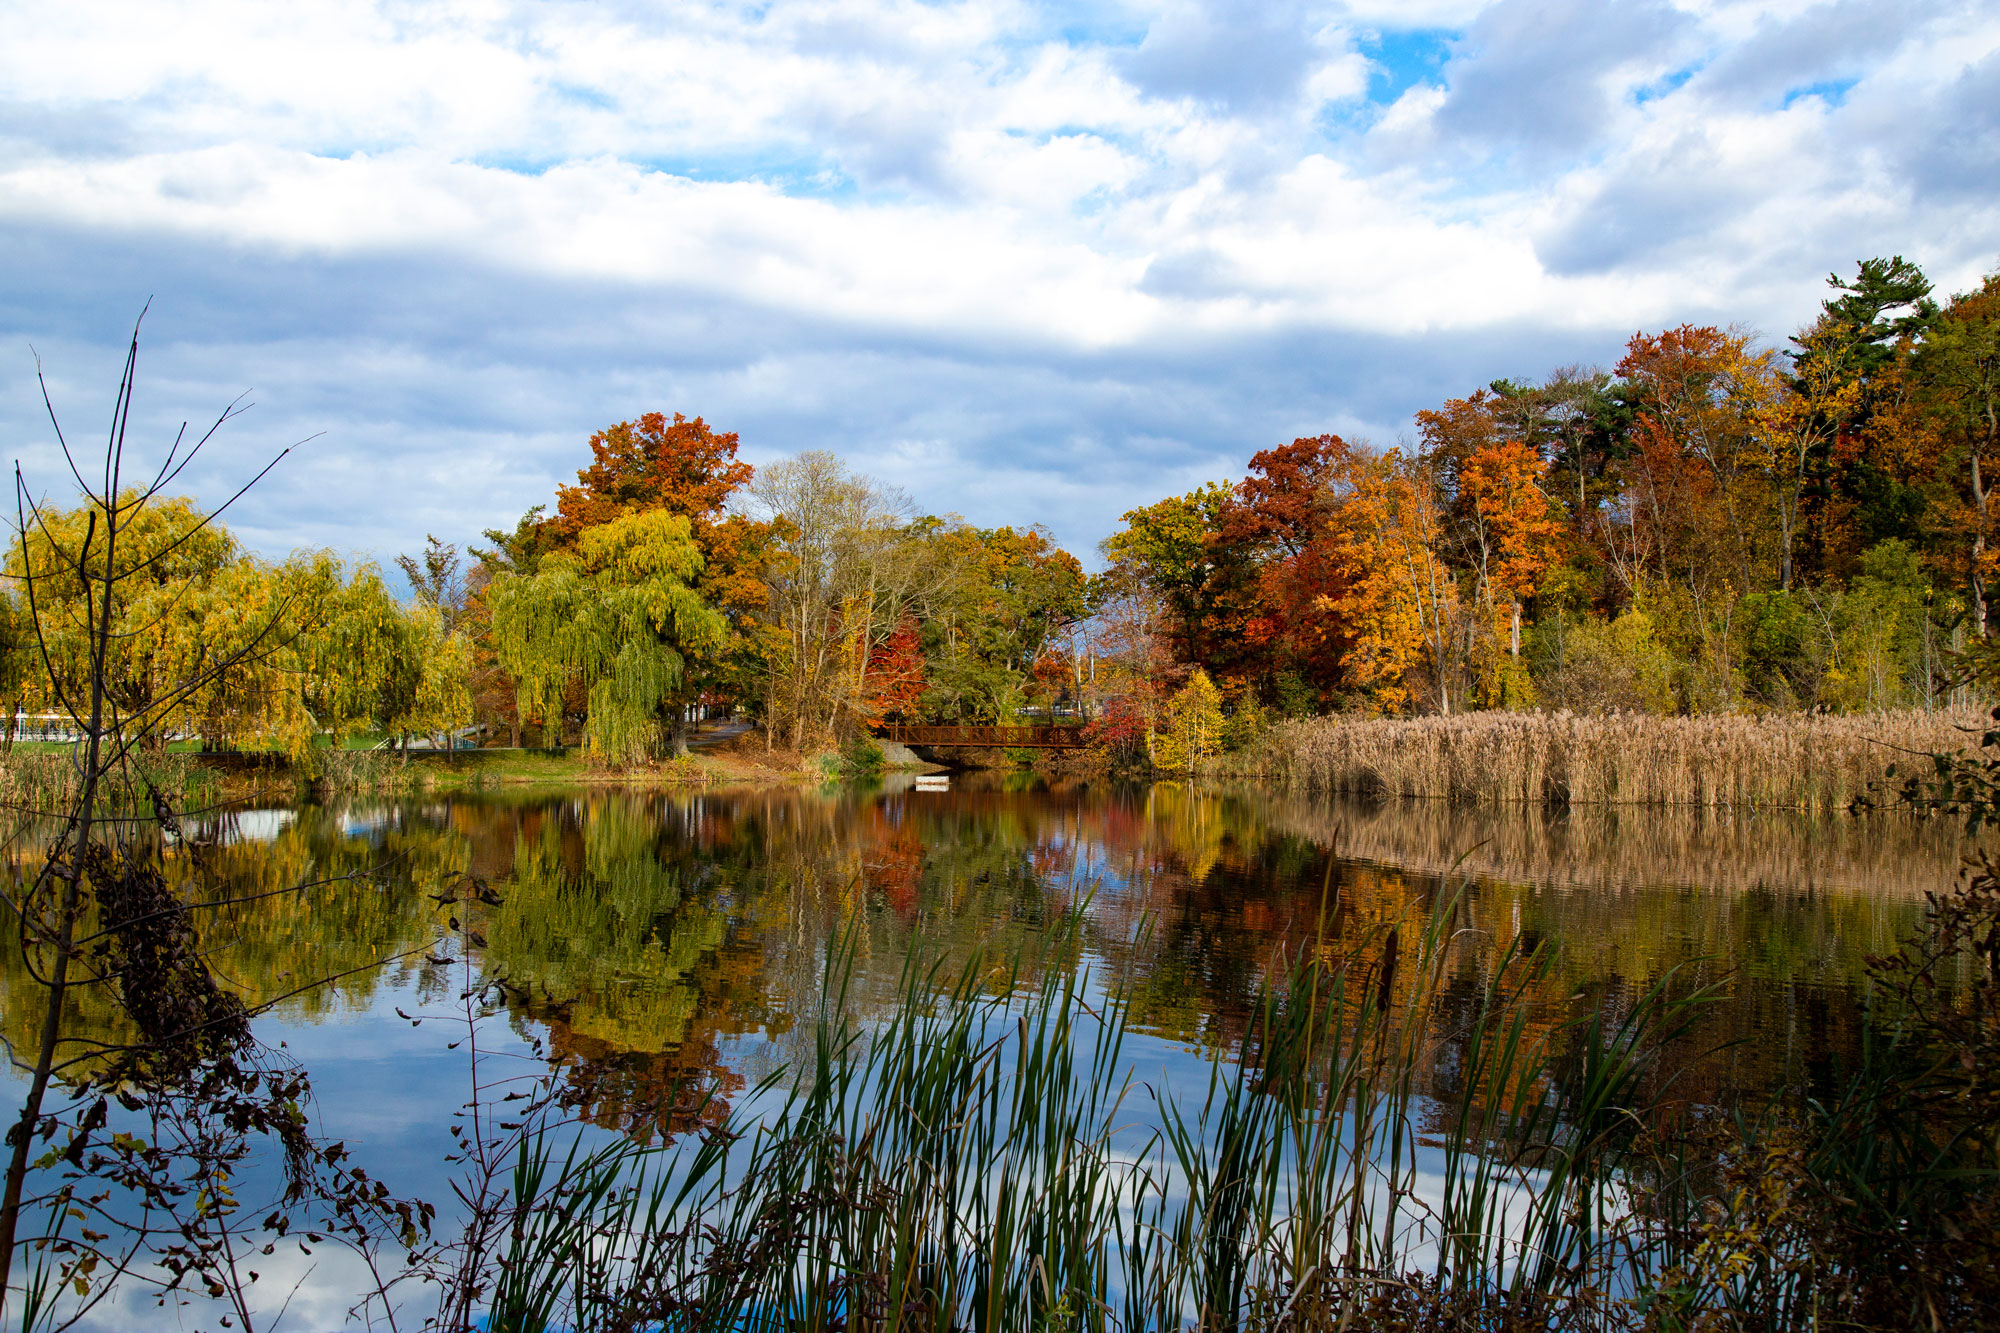 The newly renamed Parker Pond, photographed on a cloudy fall day with colorful trees reflected by the water.